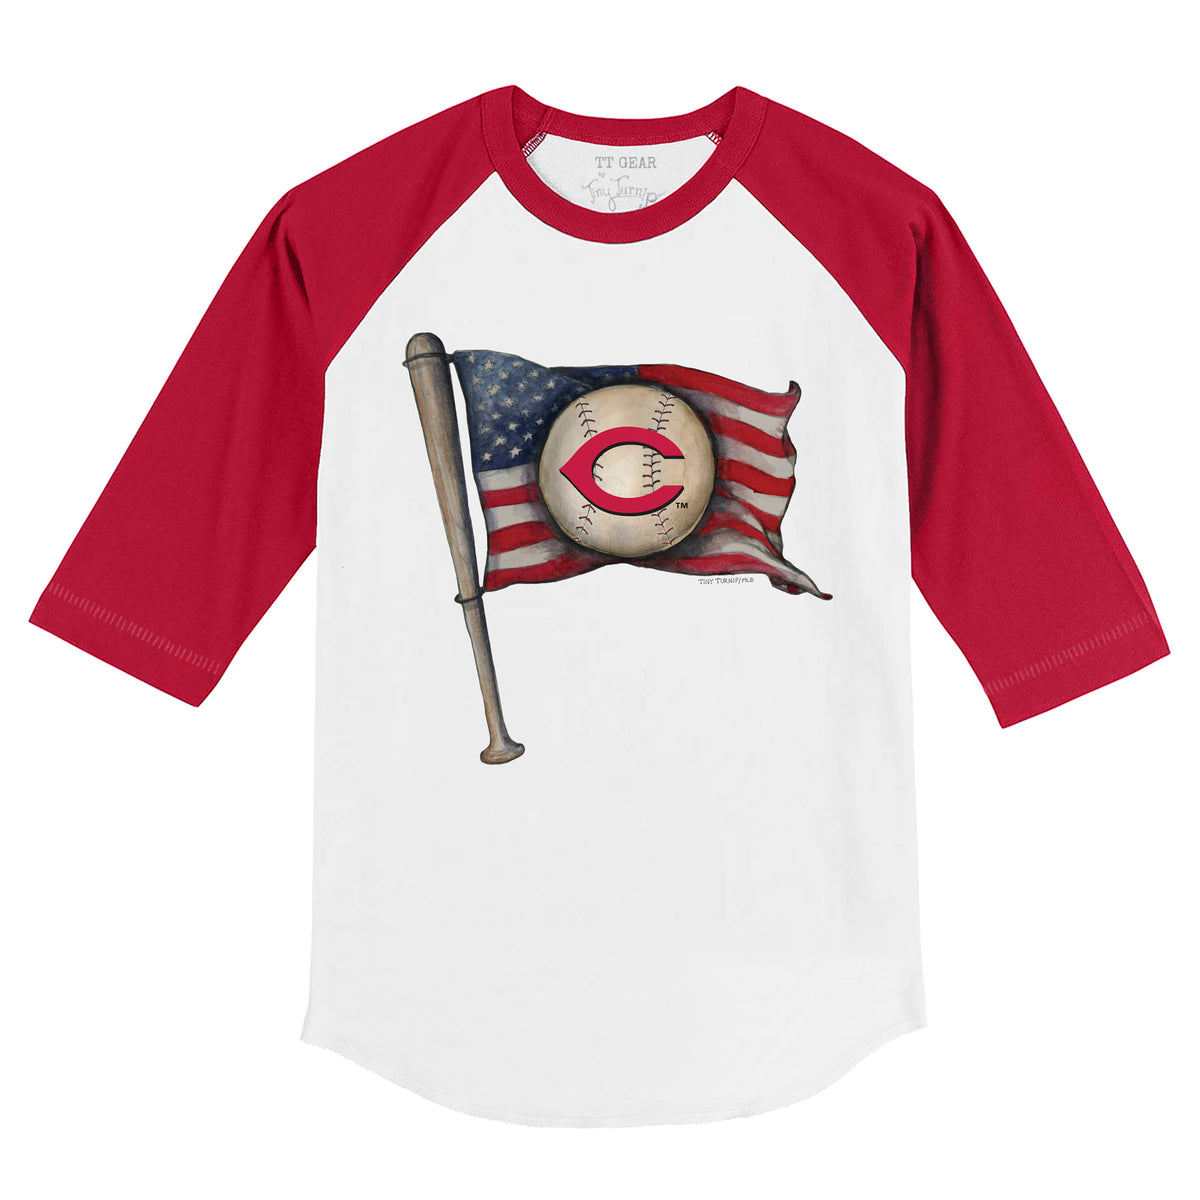 San Diego Padres 4th of July American flag shirt t-shirt by To-Tee